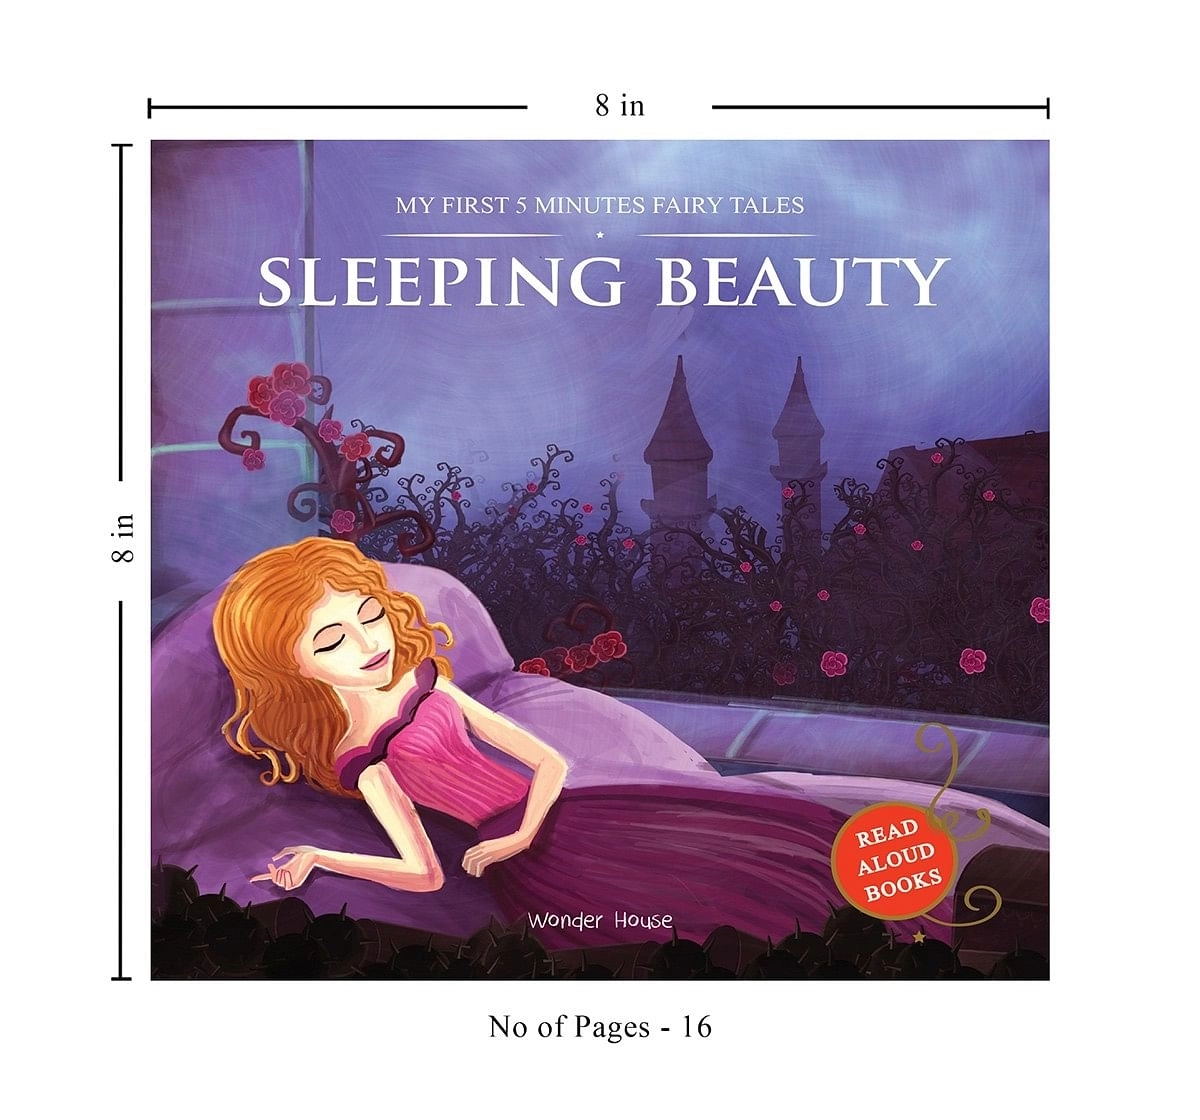 Wonder House Books My First 5 Minutes Fairy Tales Sleeping Beauty Paperback Multicolor 3Y+